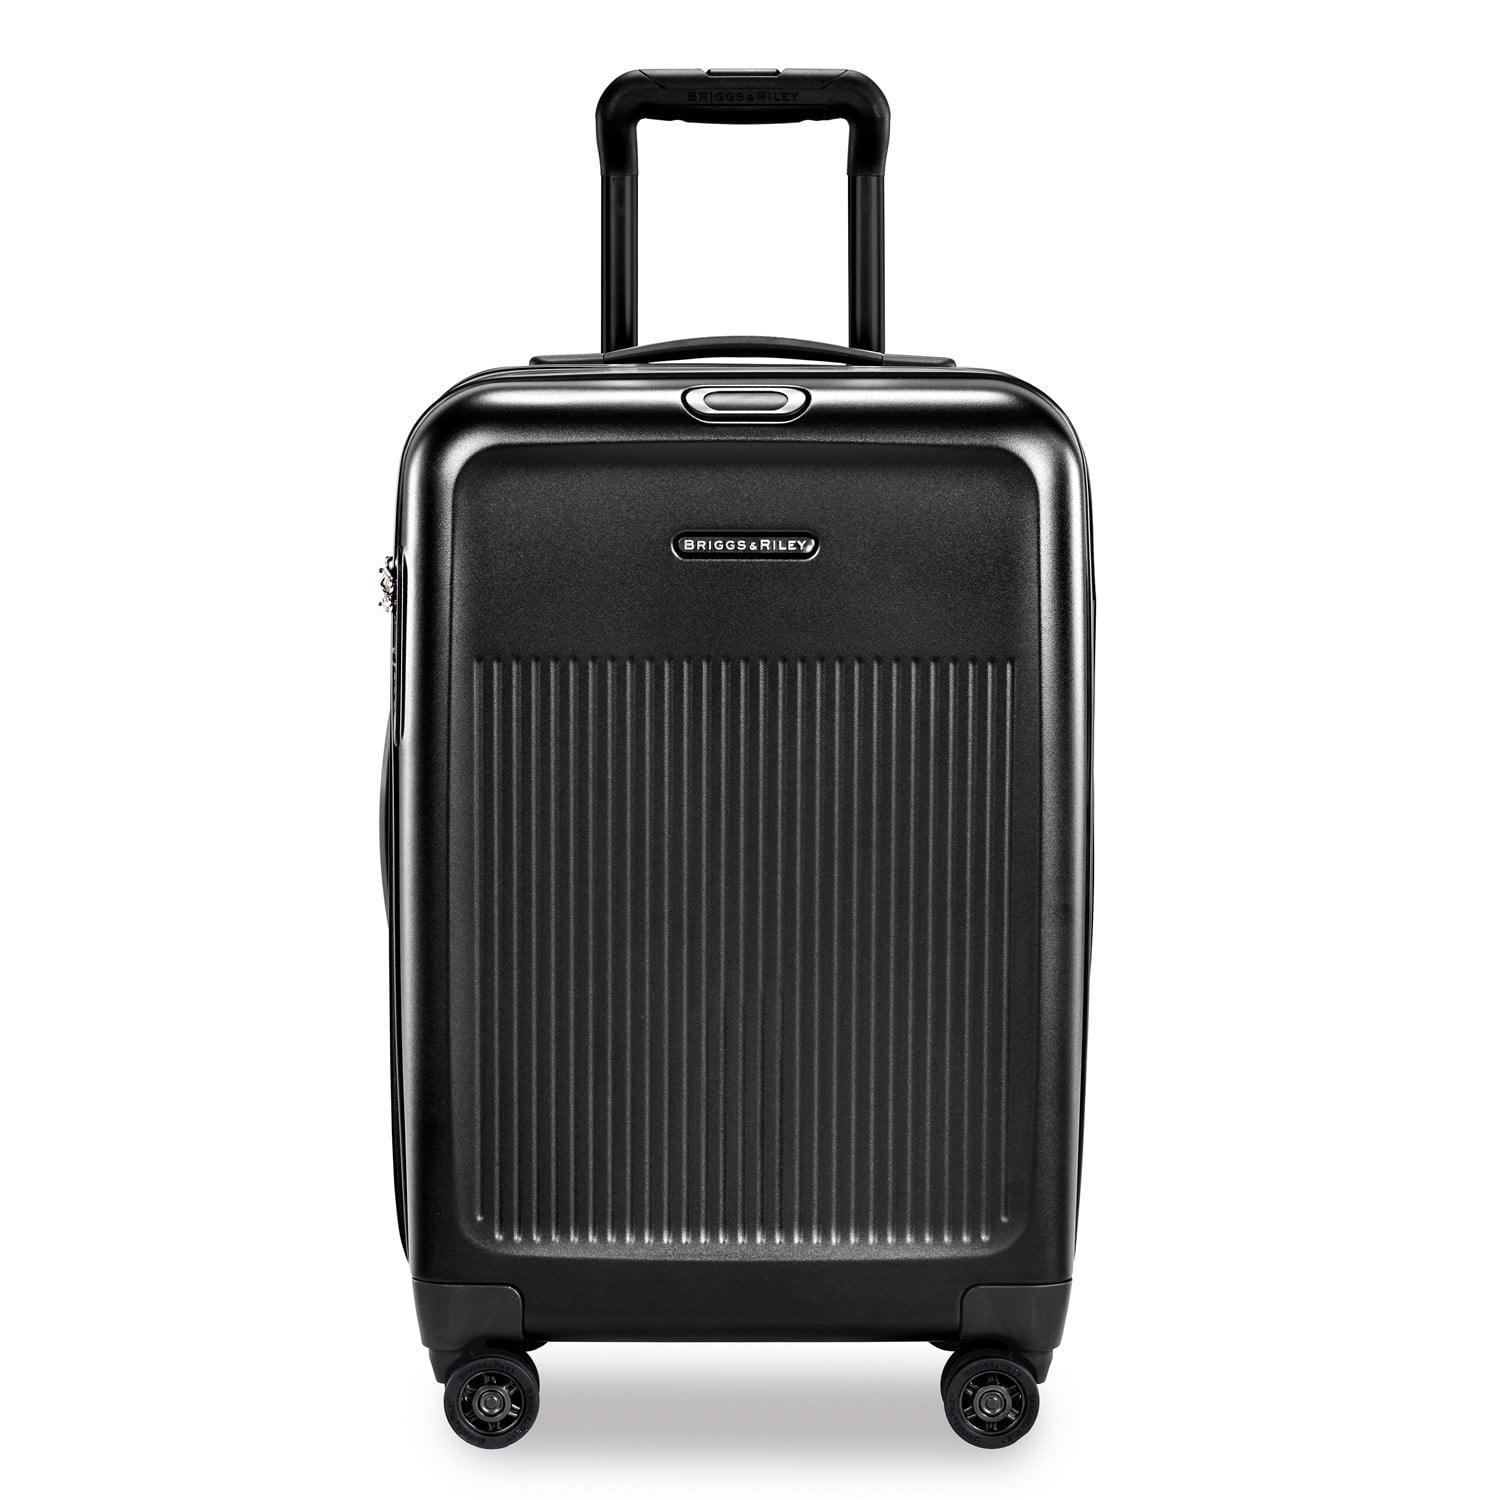 Briggs & Riley Sympatico Domestic Carry-On Expandable Spinner Luggage - Black